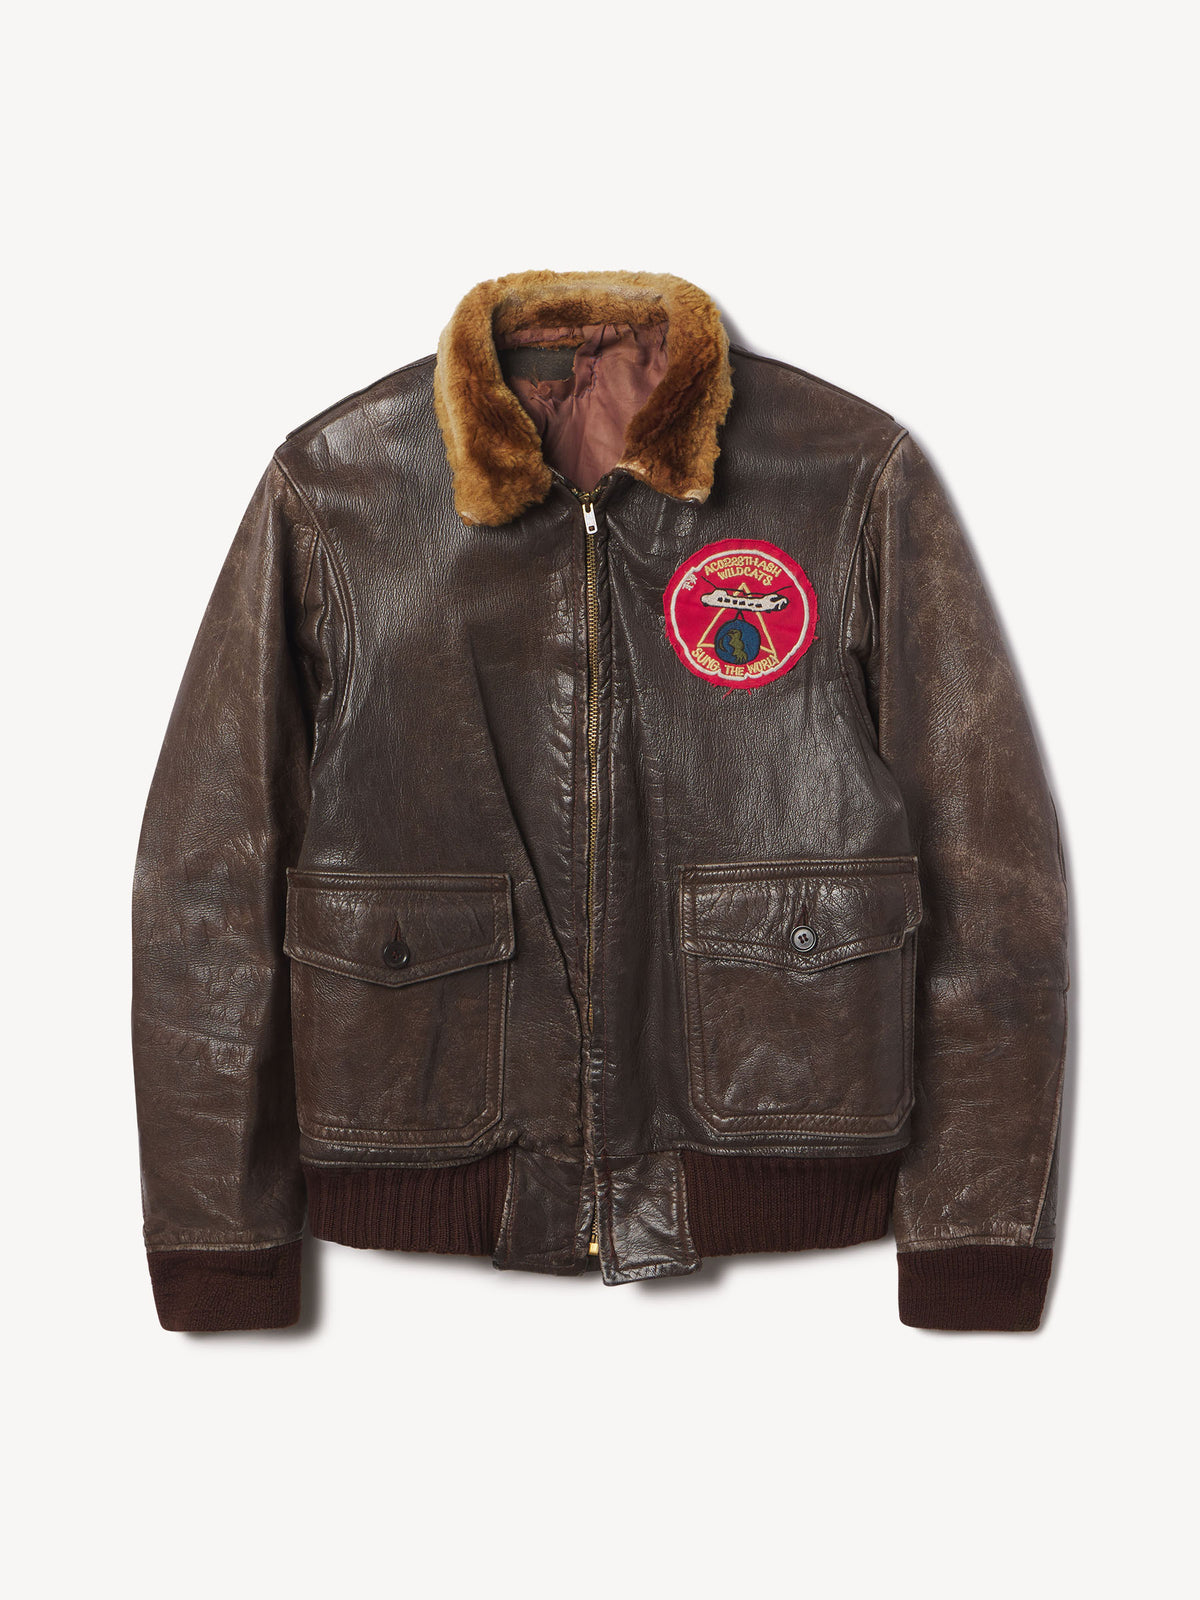 Leather Bomber - 0234 - Product Flat